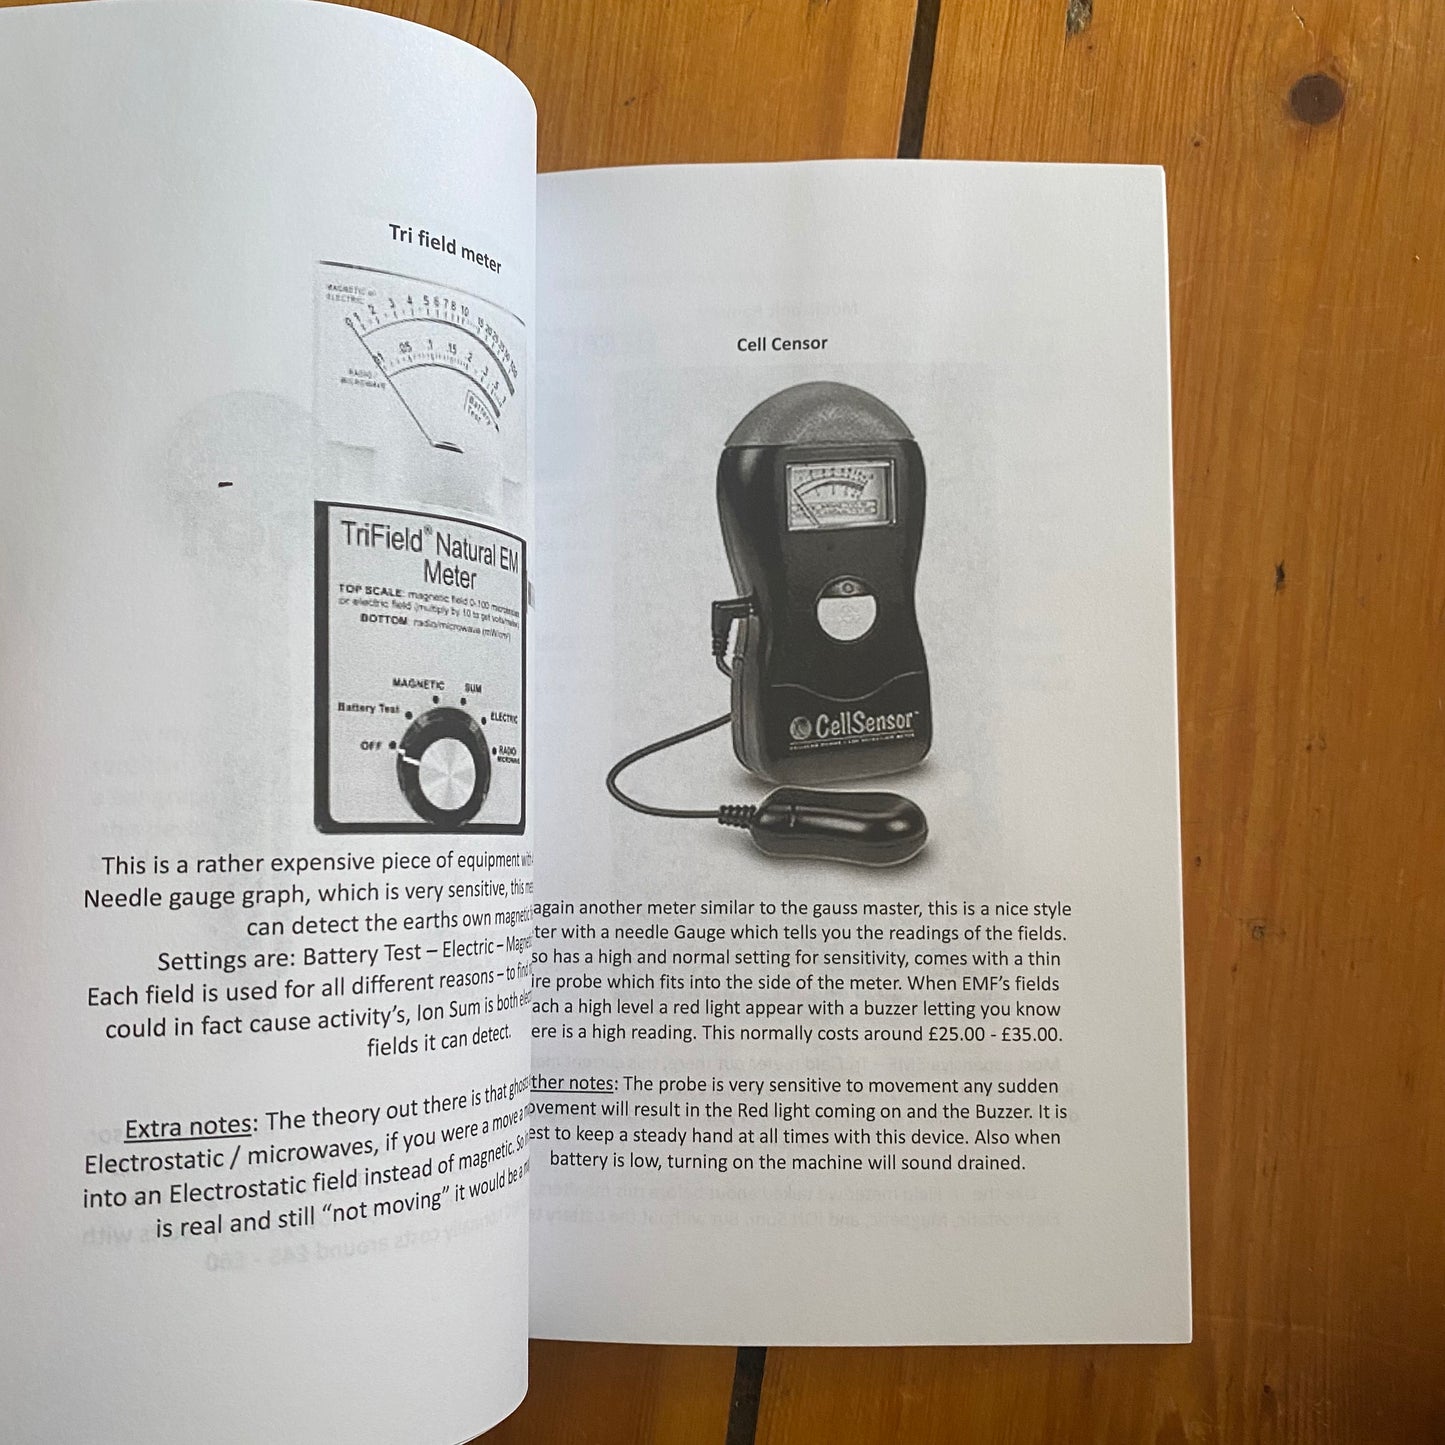 Ghost Hunting Equipment Guide: The Paranormal Equipment Guide. by Project-reveal Lee Steer